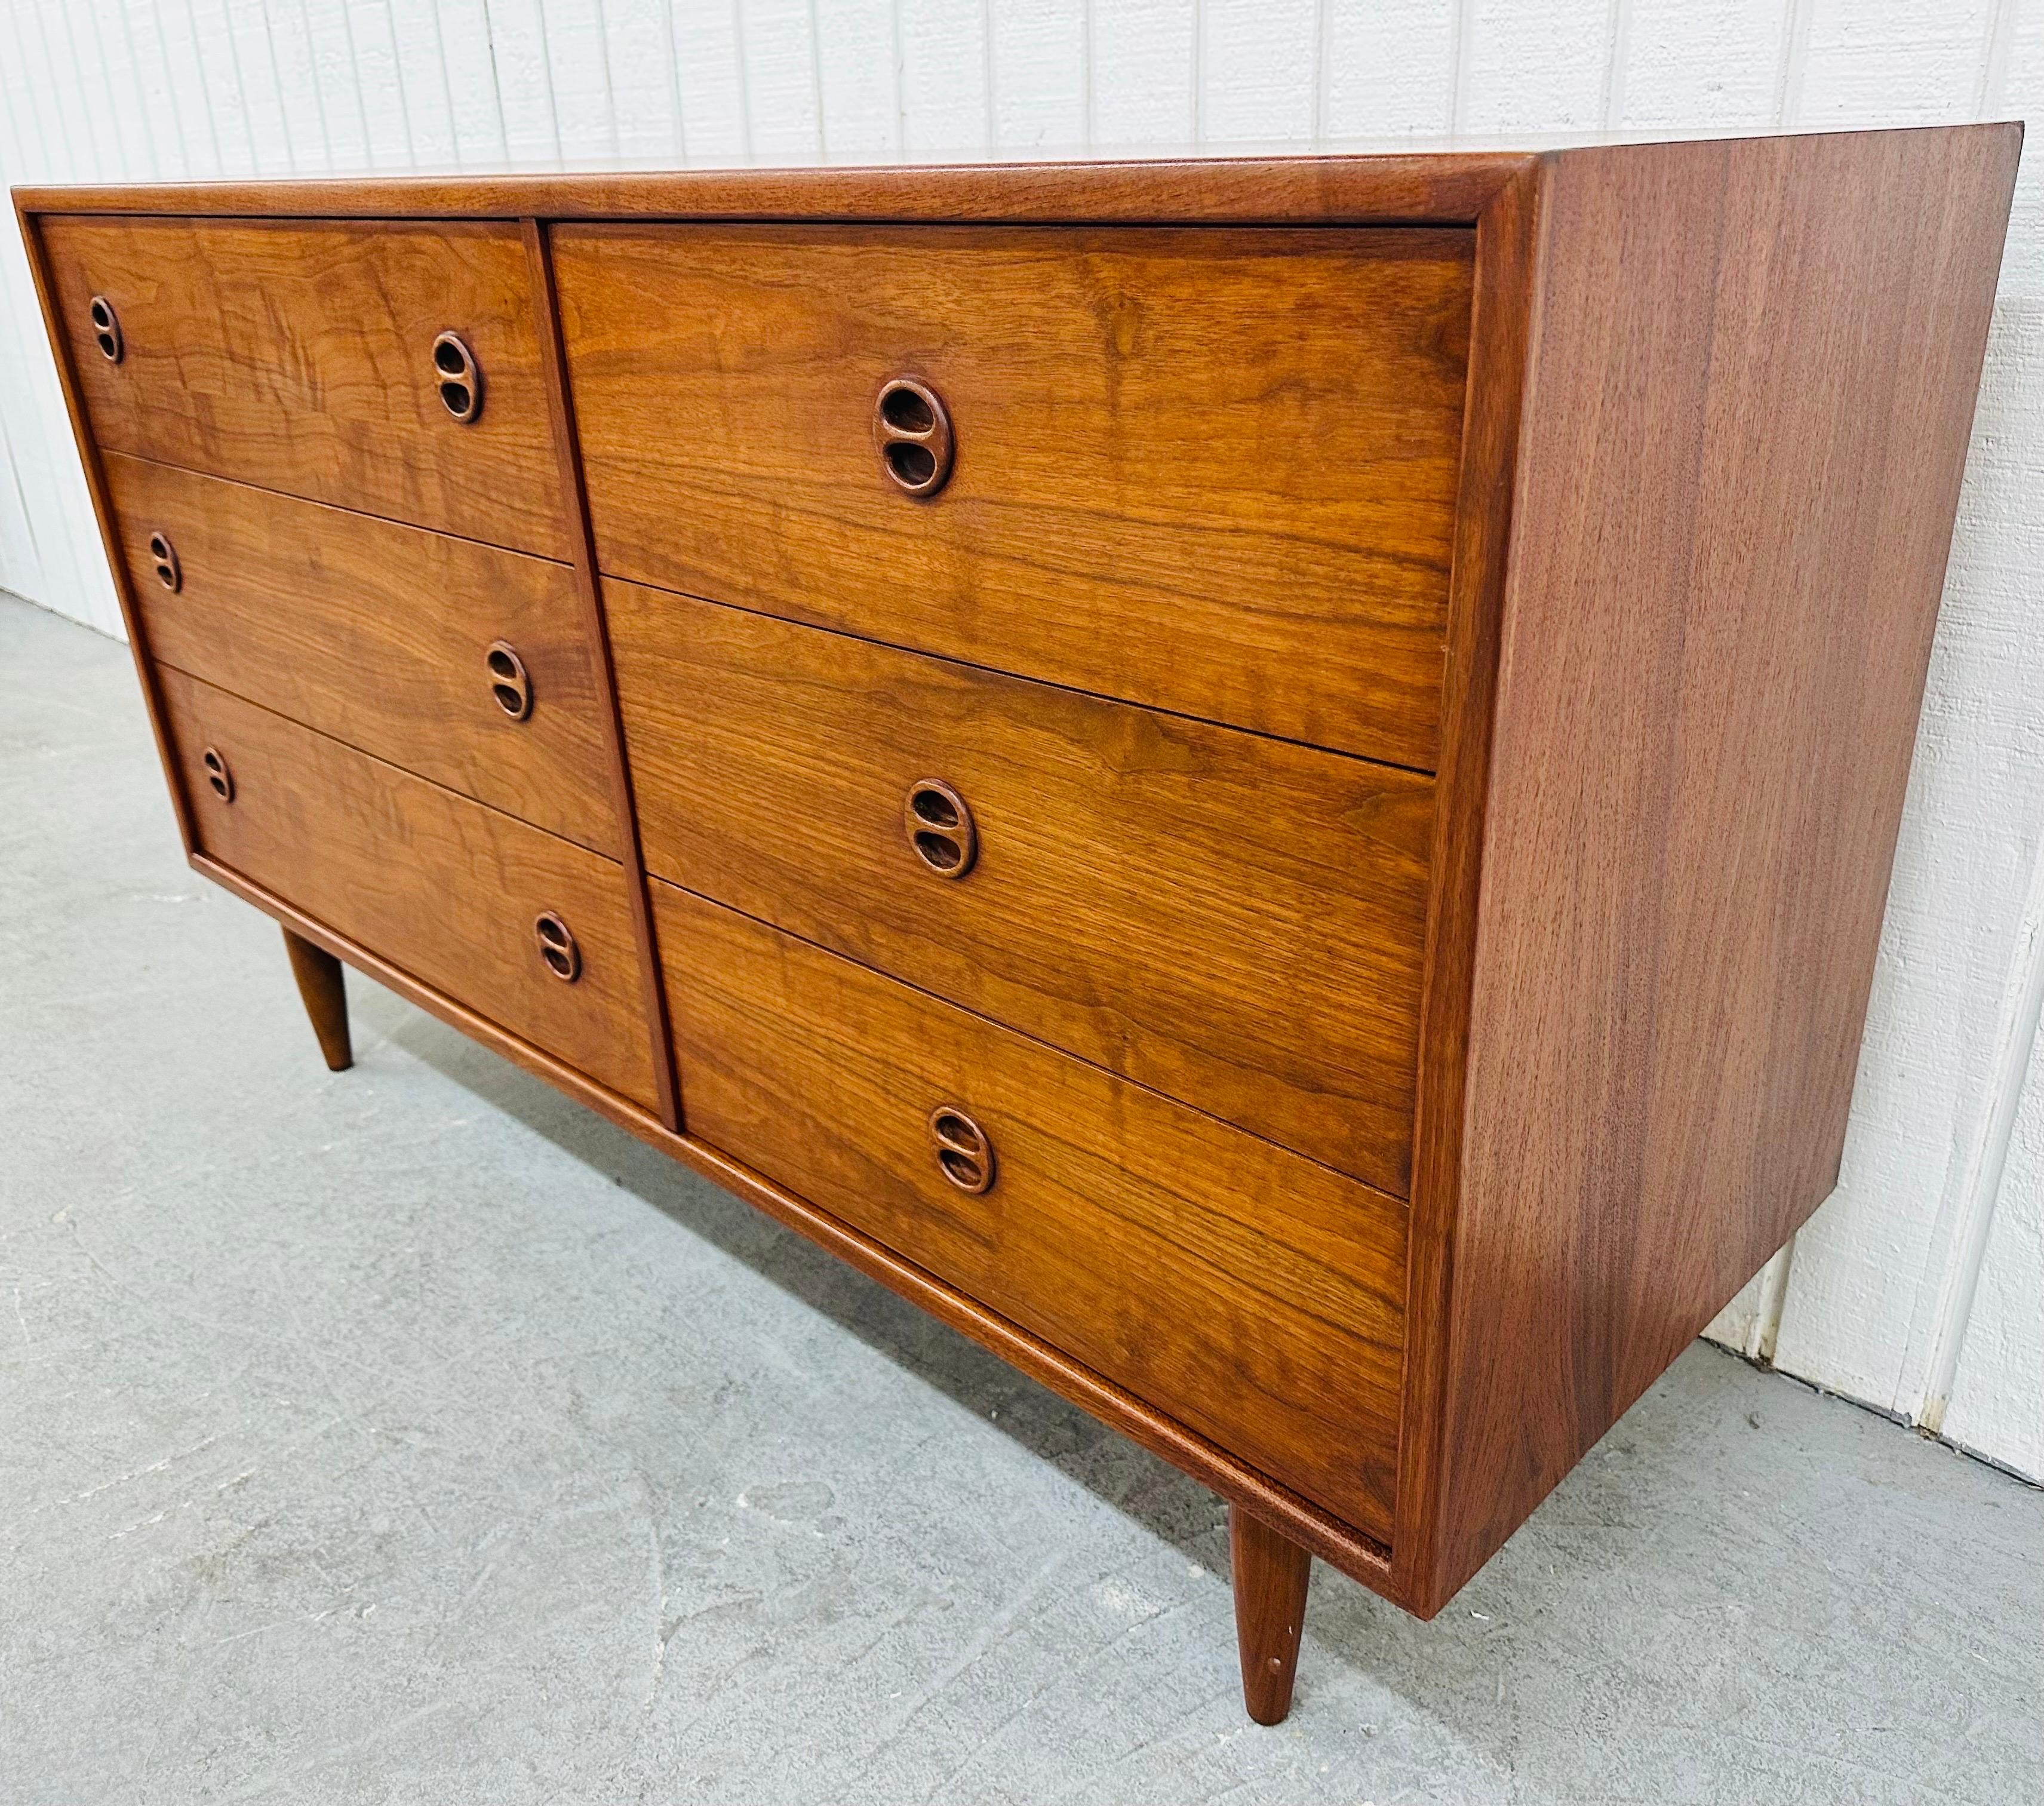 This listing is for a Vintage Danish Modern Teak Double Dresser. Featuring a straight line design, six drawers for storage, round teak pulls, modern legs, and a beautiful walnut finish. This is an exceptional combination of quality and design!